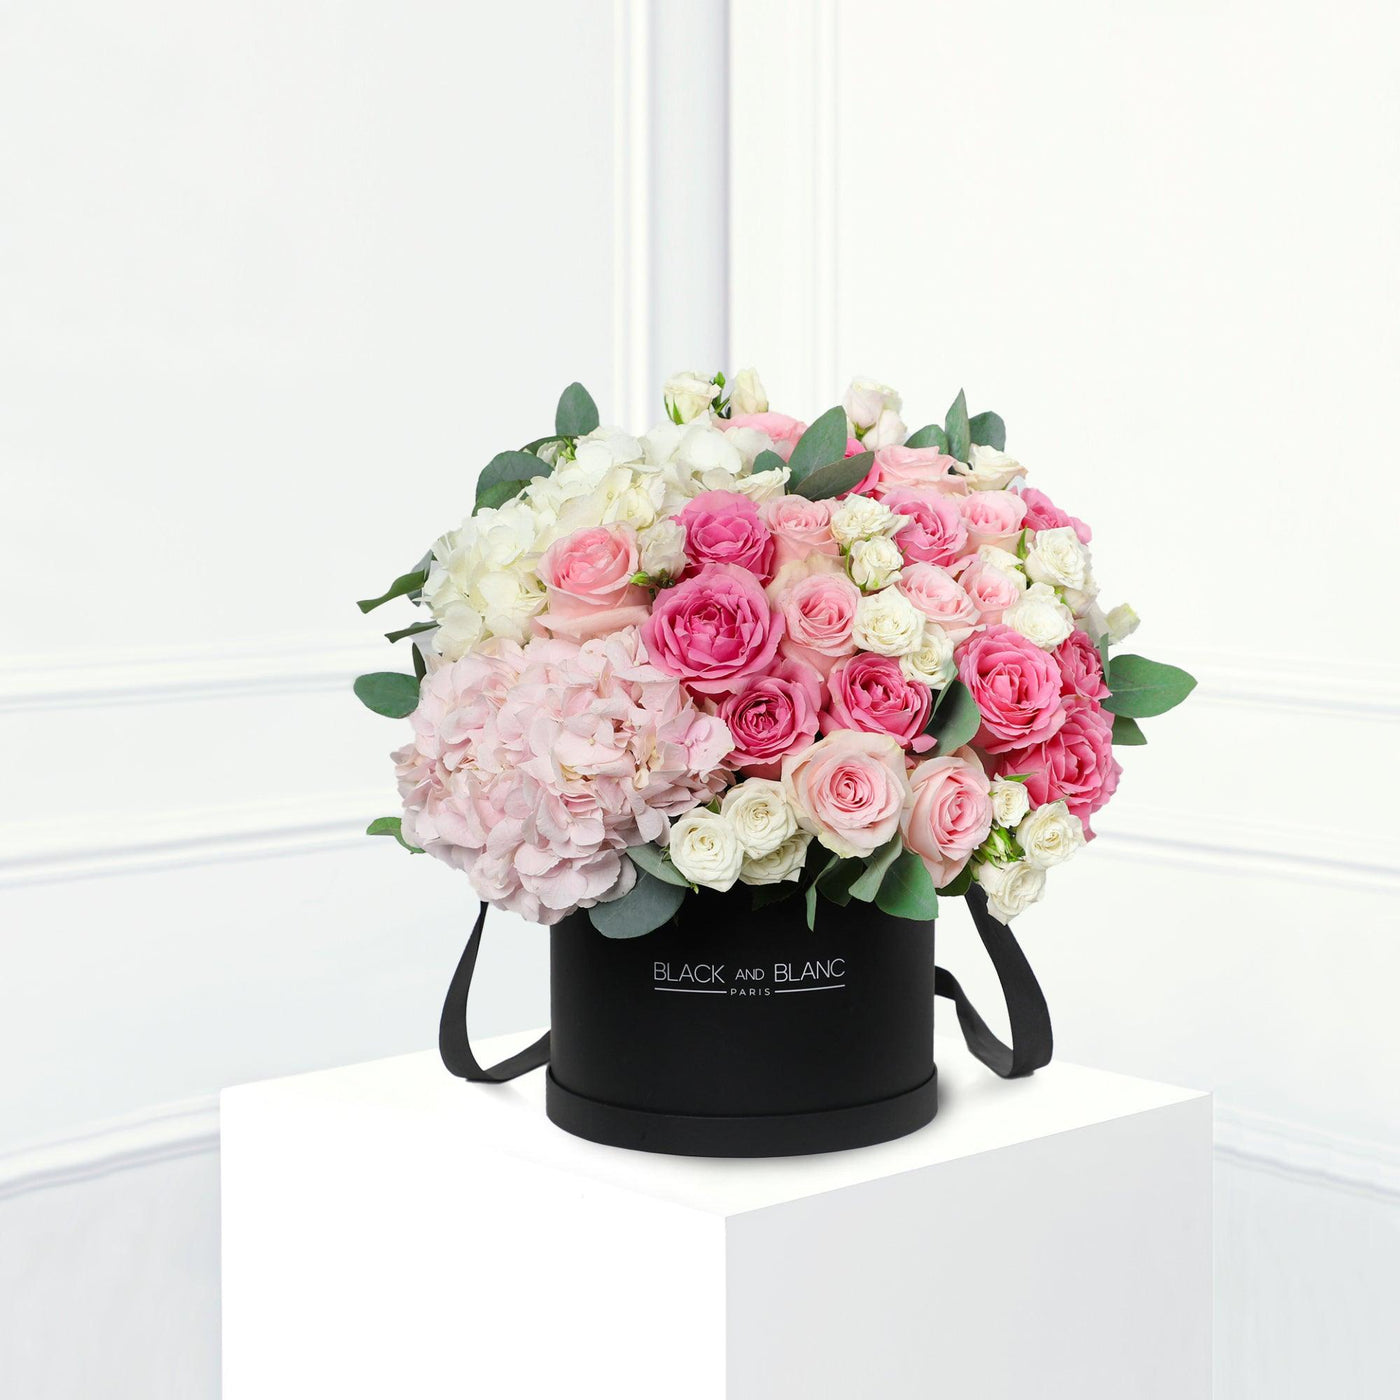 Notre Dame BouqBox - Fresh Flowers - BLACK AND BLANC